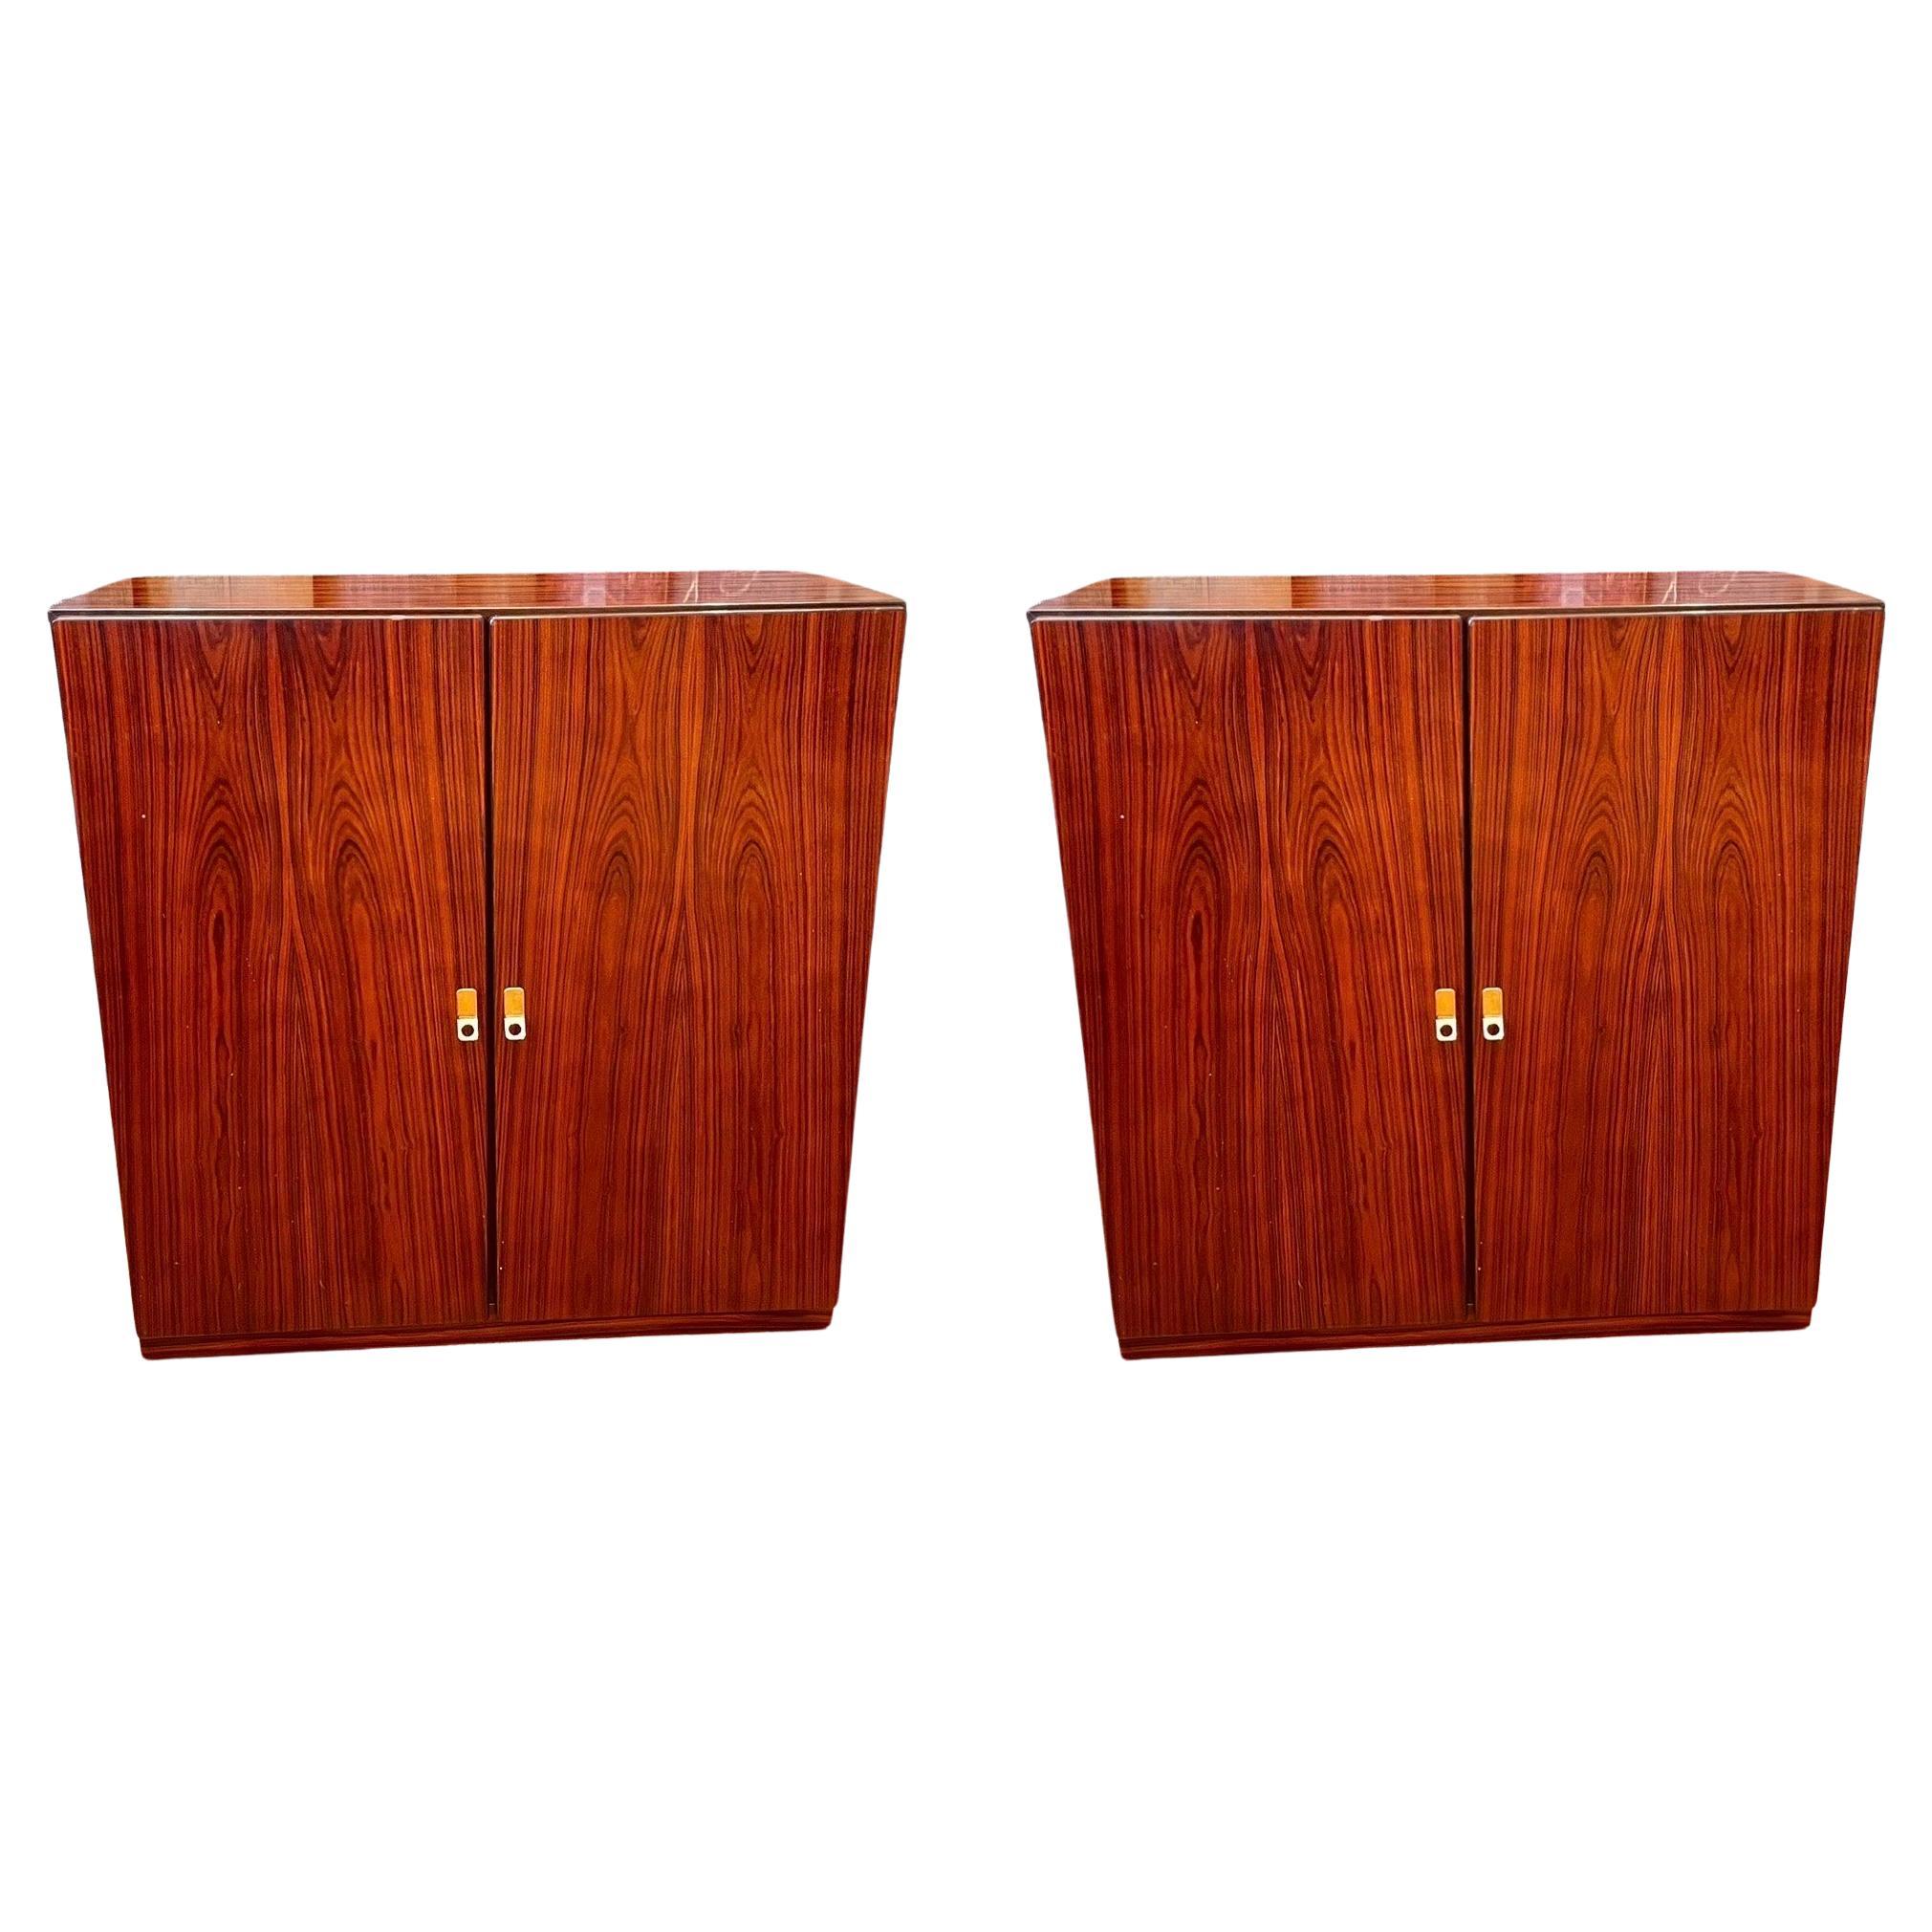 Pair of Danish Modern Rosewood Cabinets by Brouer Furniture